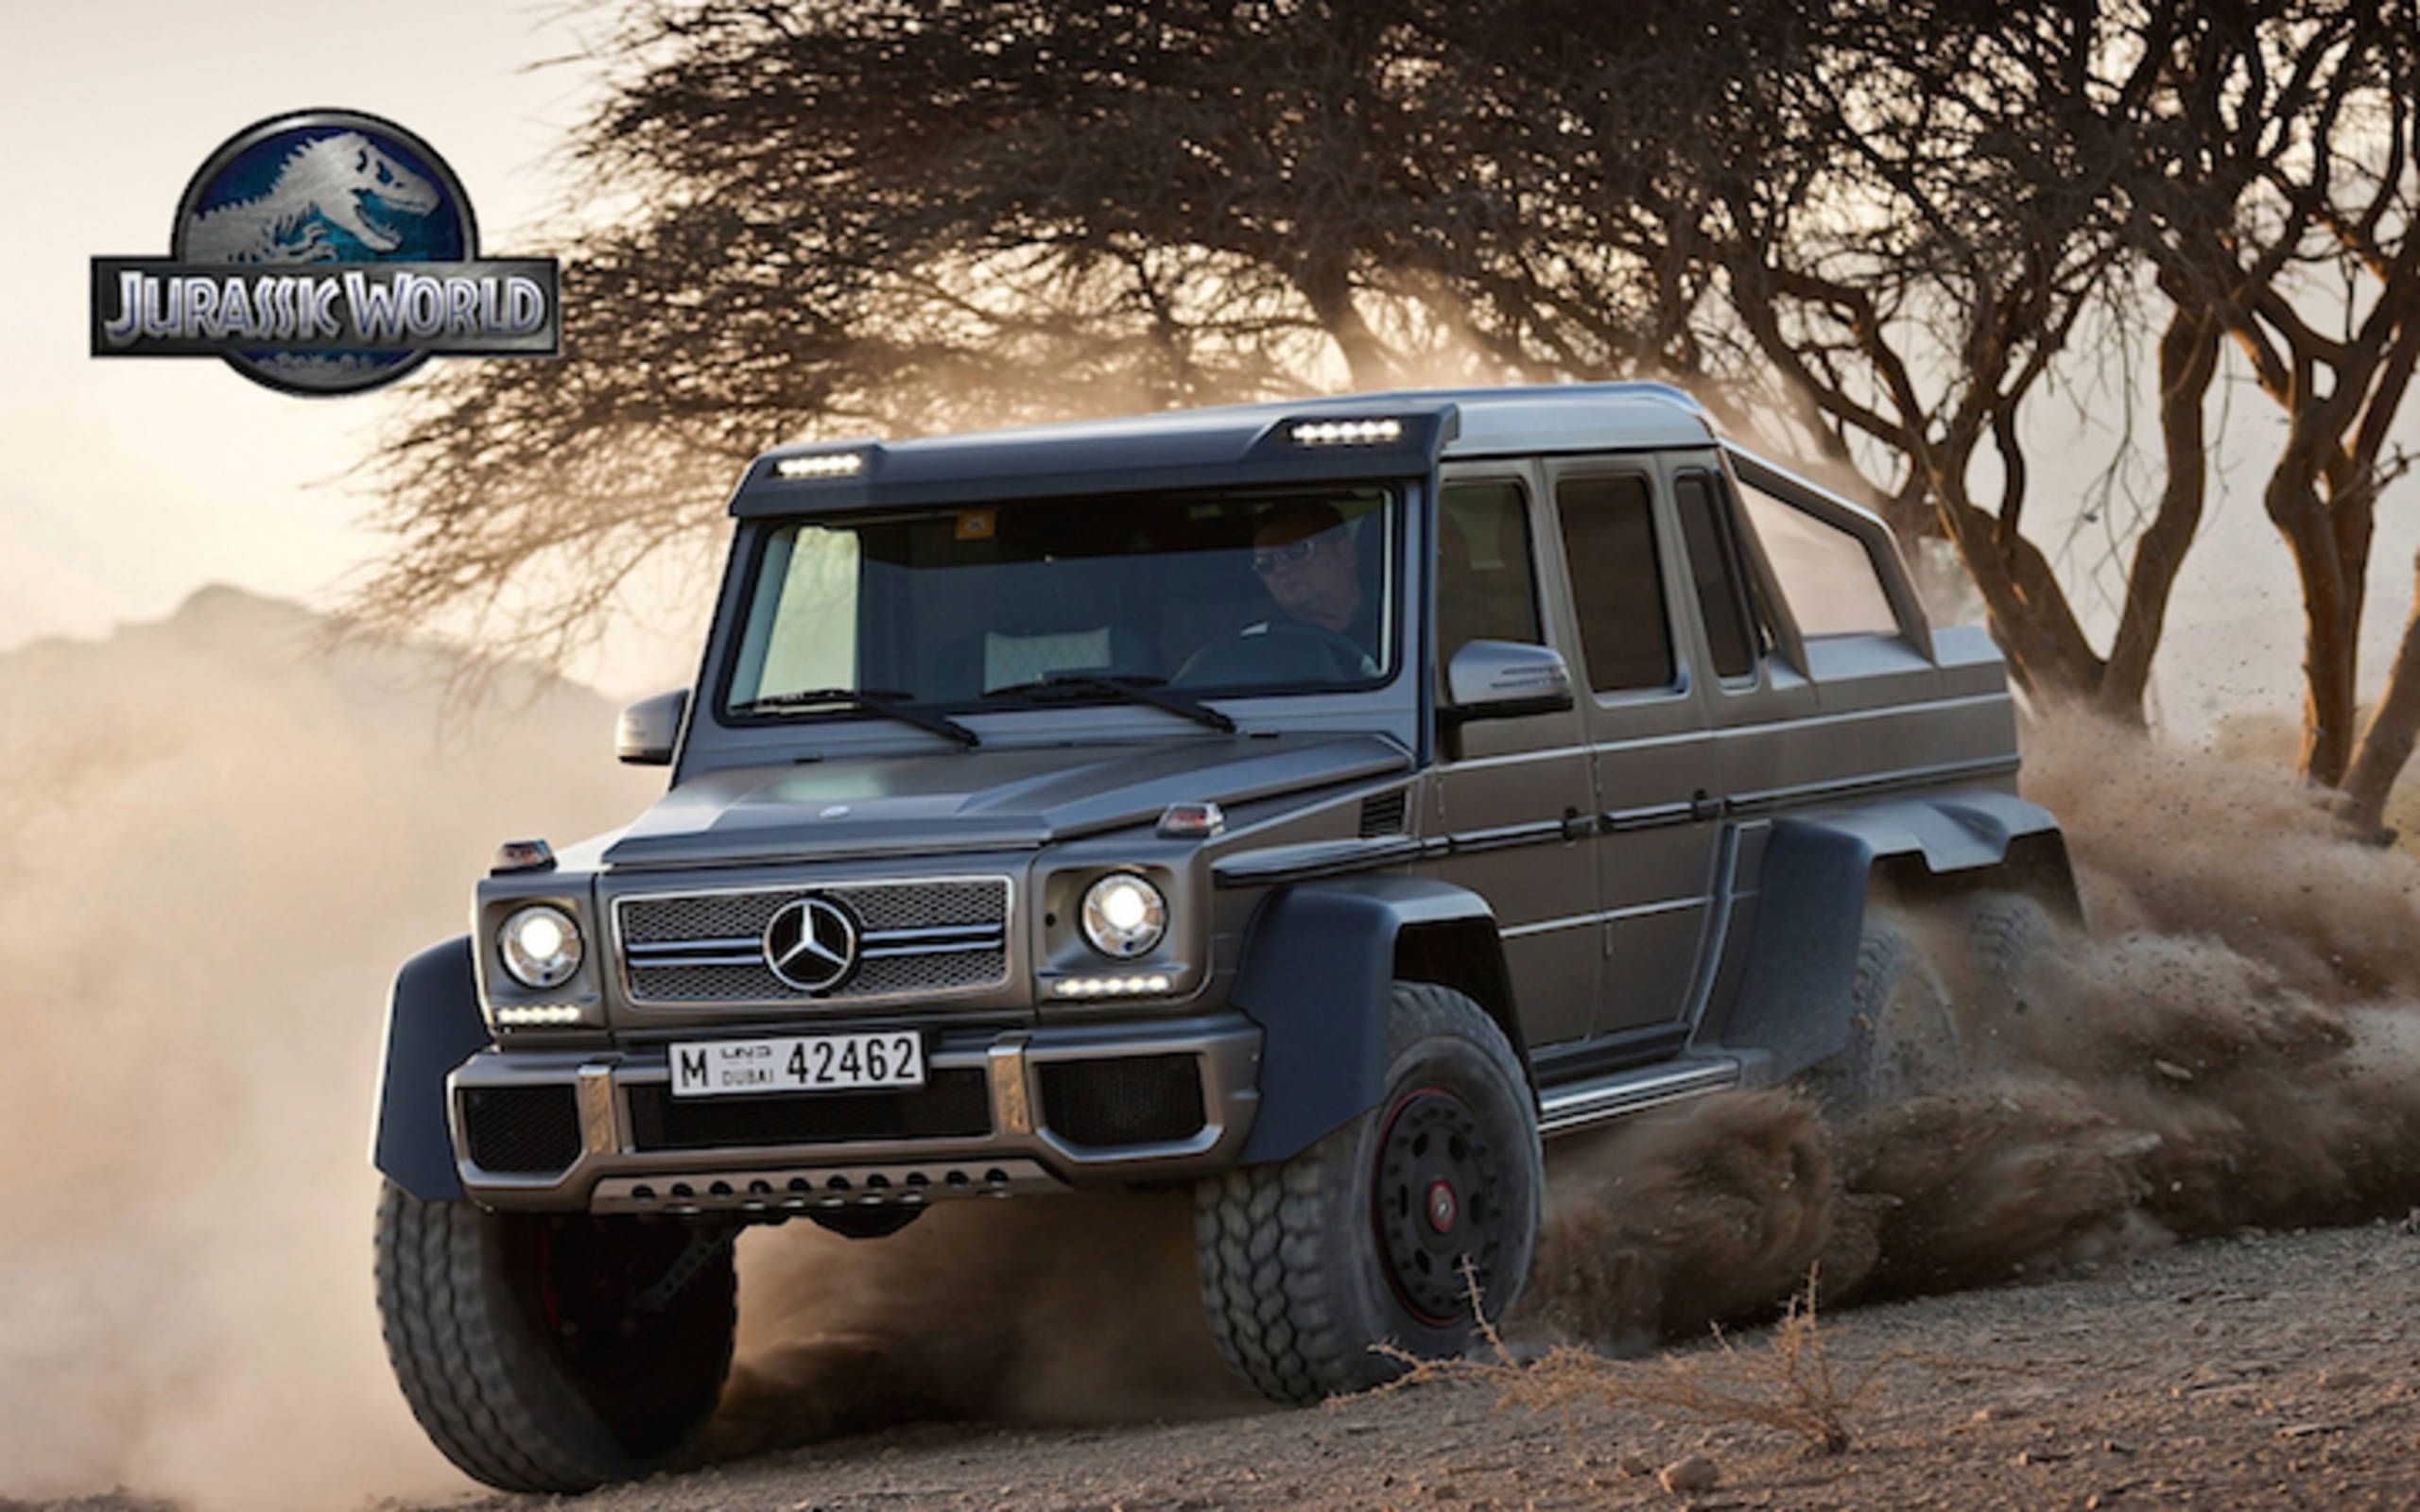 Mercedes Benz Vehicles To Be Featured In 'Jurassic World'